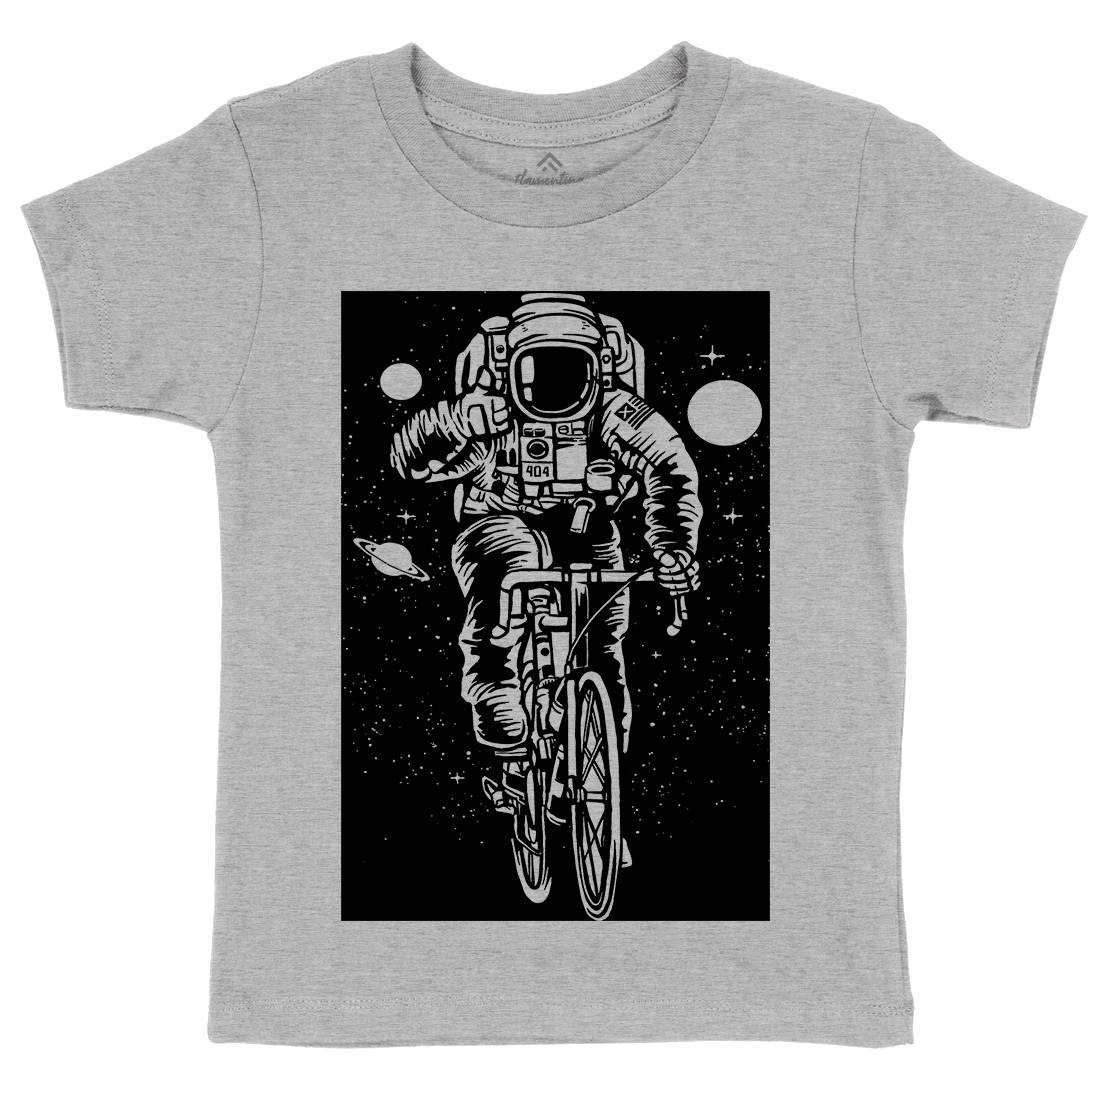 Astronaut Bicycle Kids Crew Neck T-Shirt Space A503